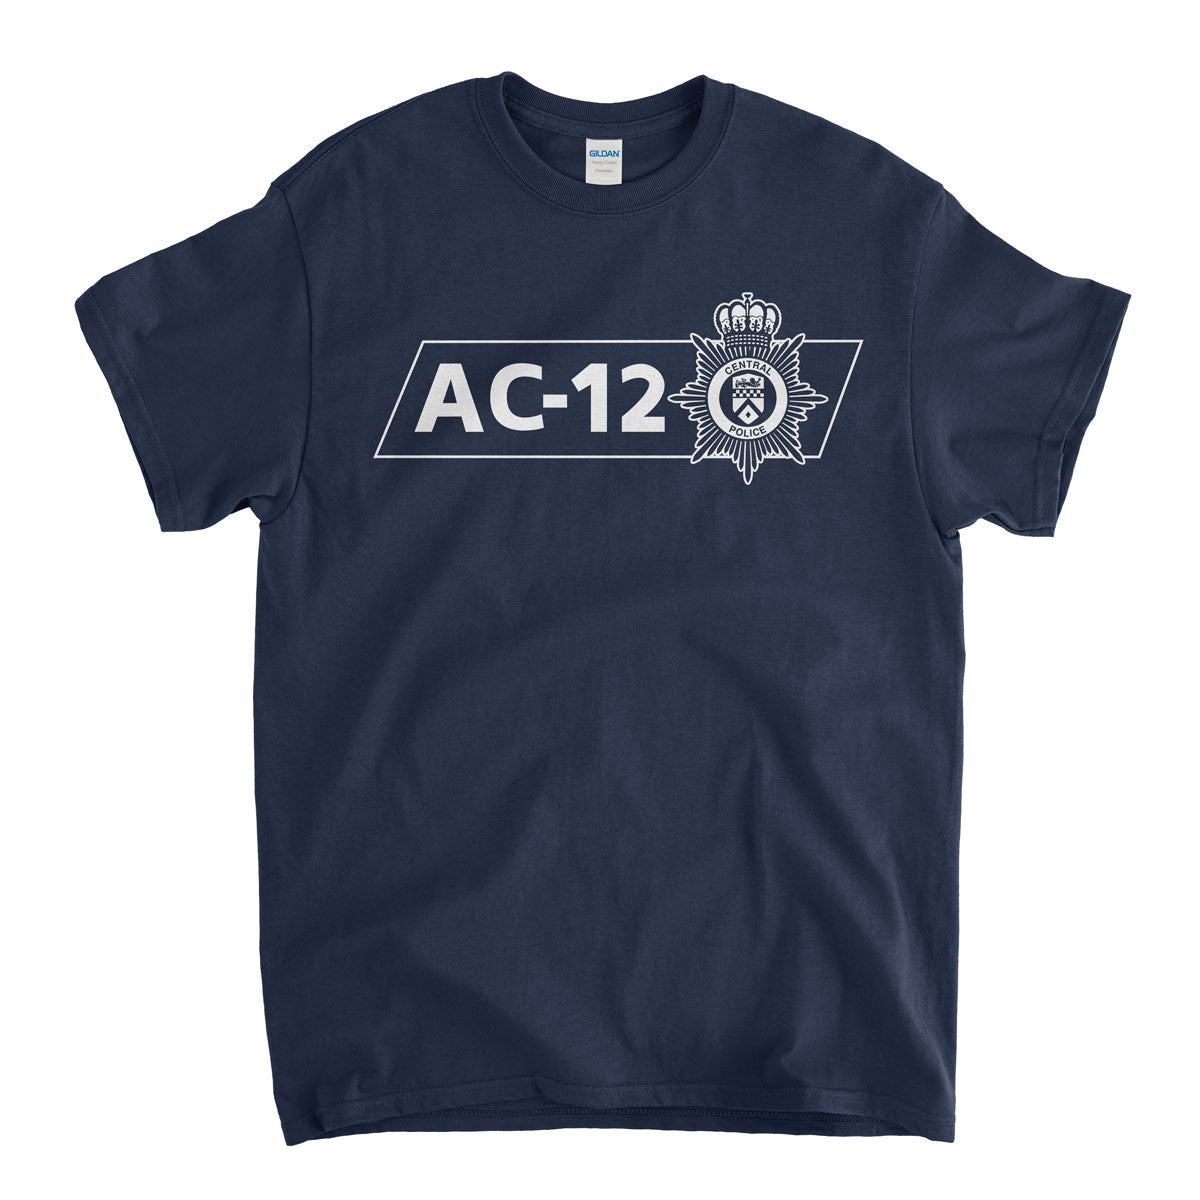 AC-12 T Shirt Central Police Wear It In The Line Of Duty